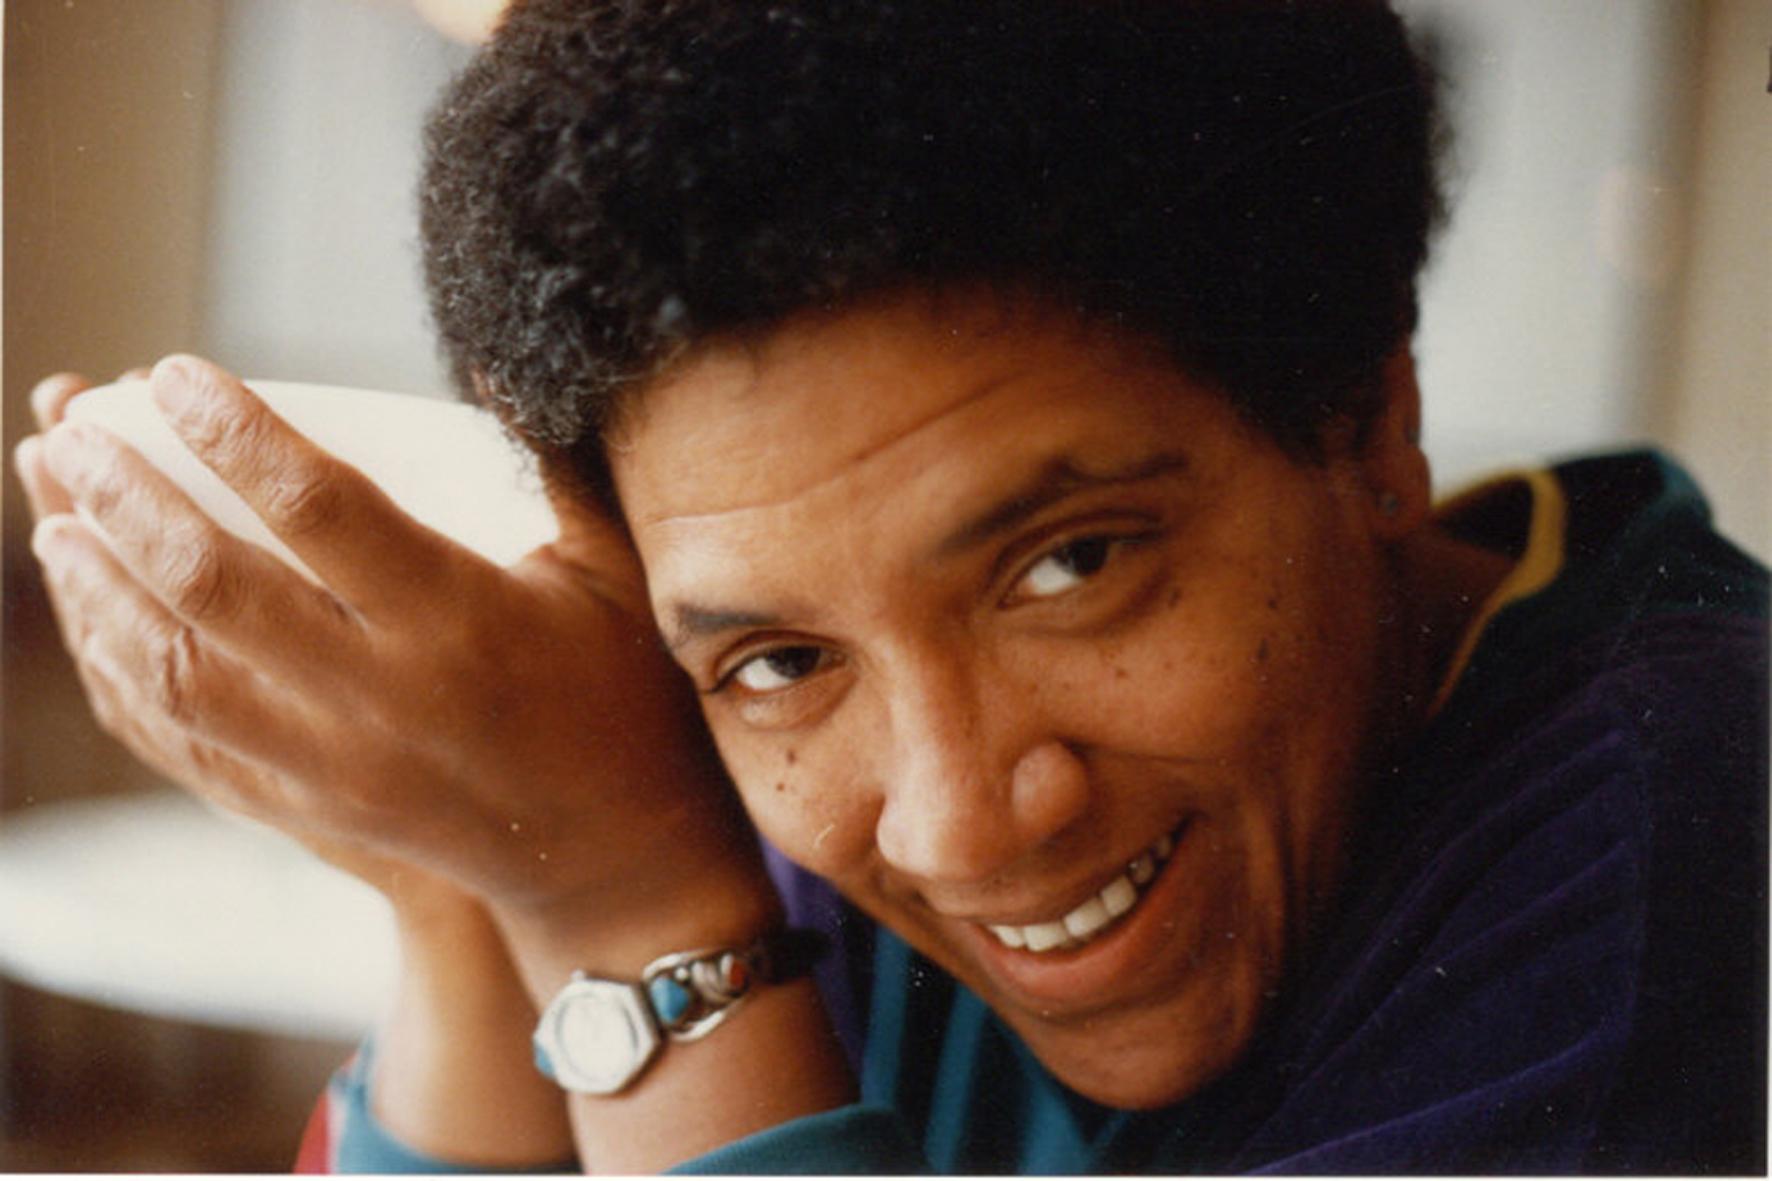 Happy birthday Audre Lorde! A big influence. My favorite poem: A Litany for Survival  